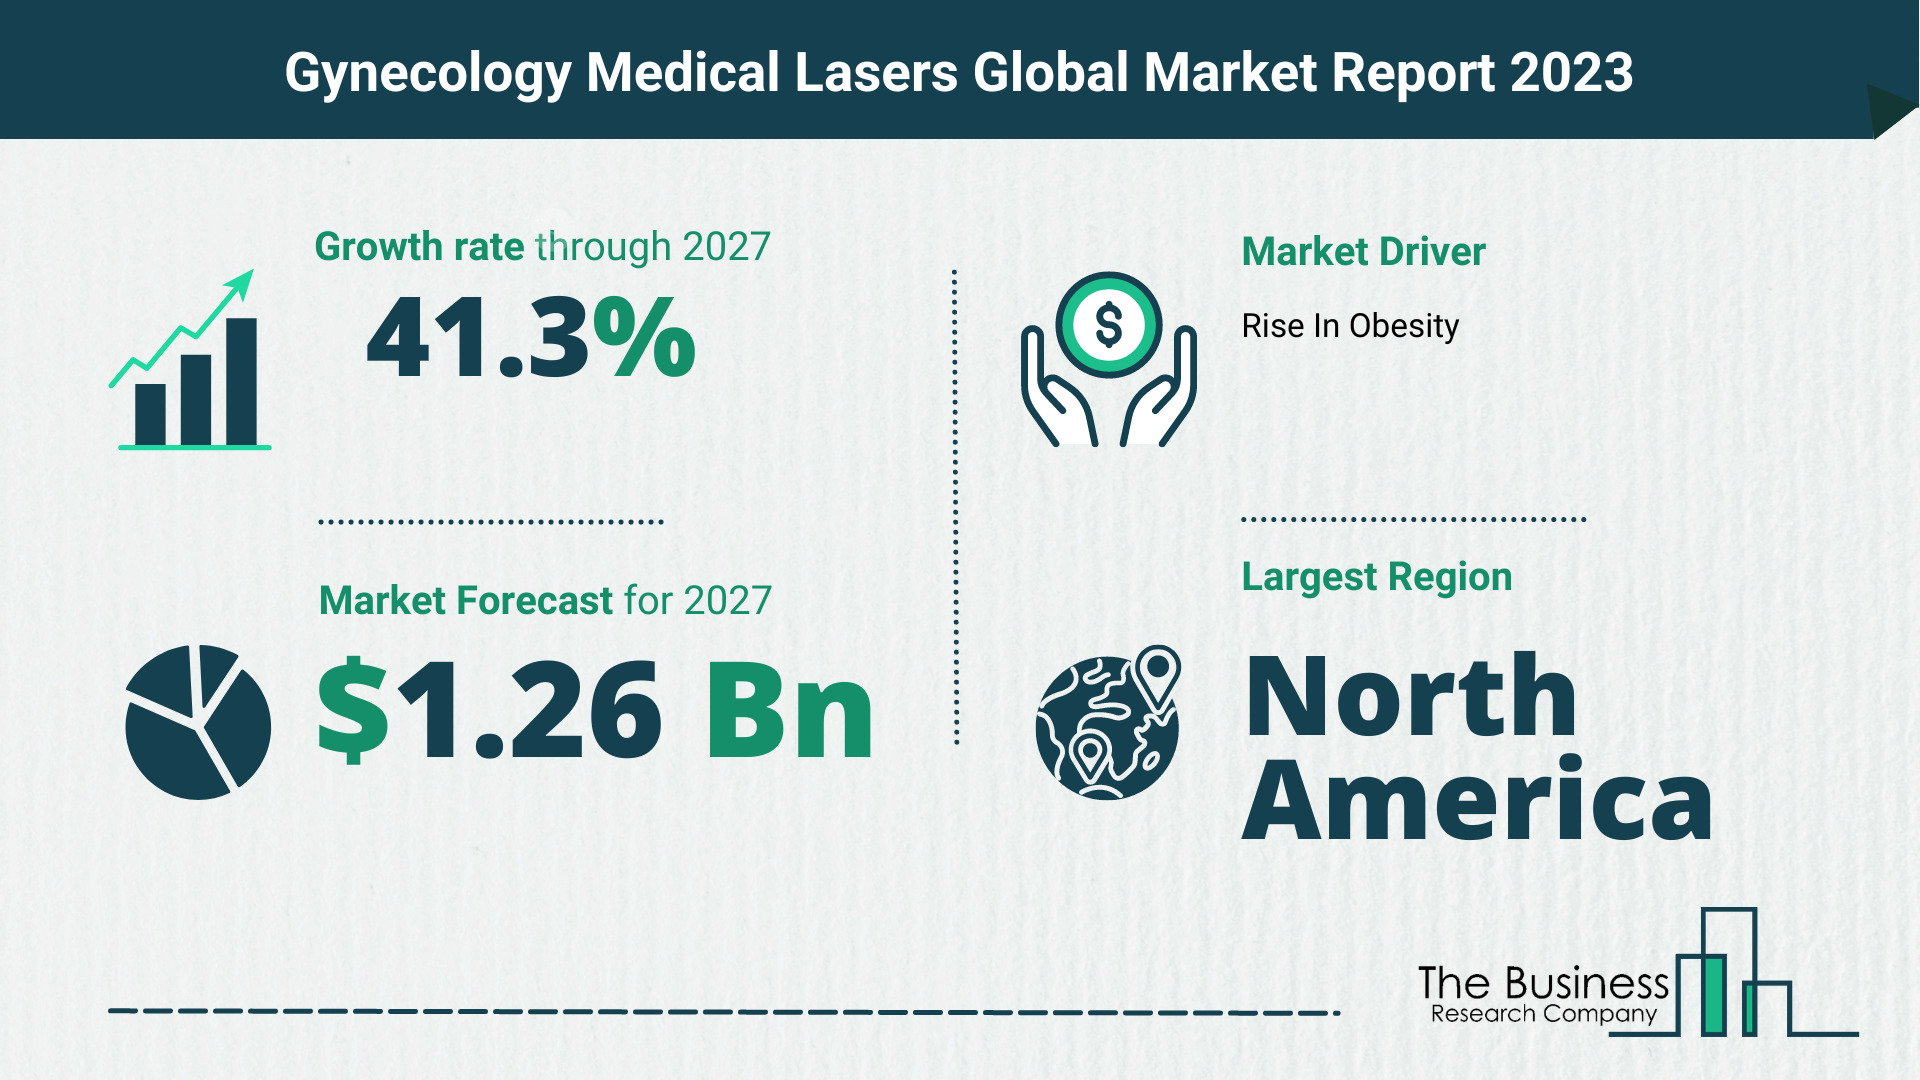 How Will The Gynecology Medical Lasers Market Globally Expand In 2023?